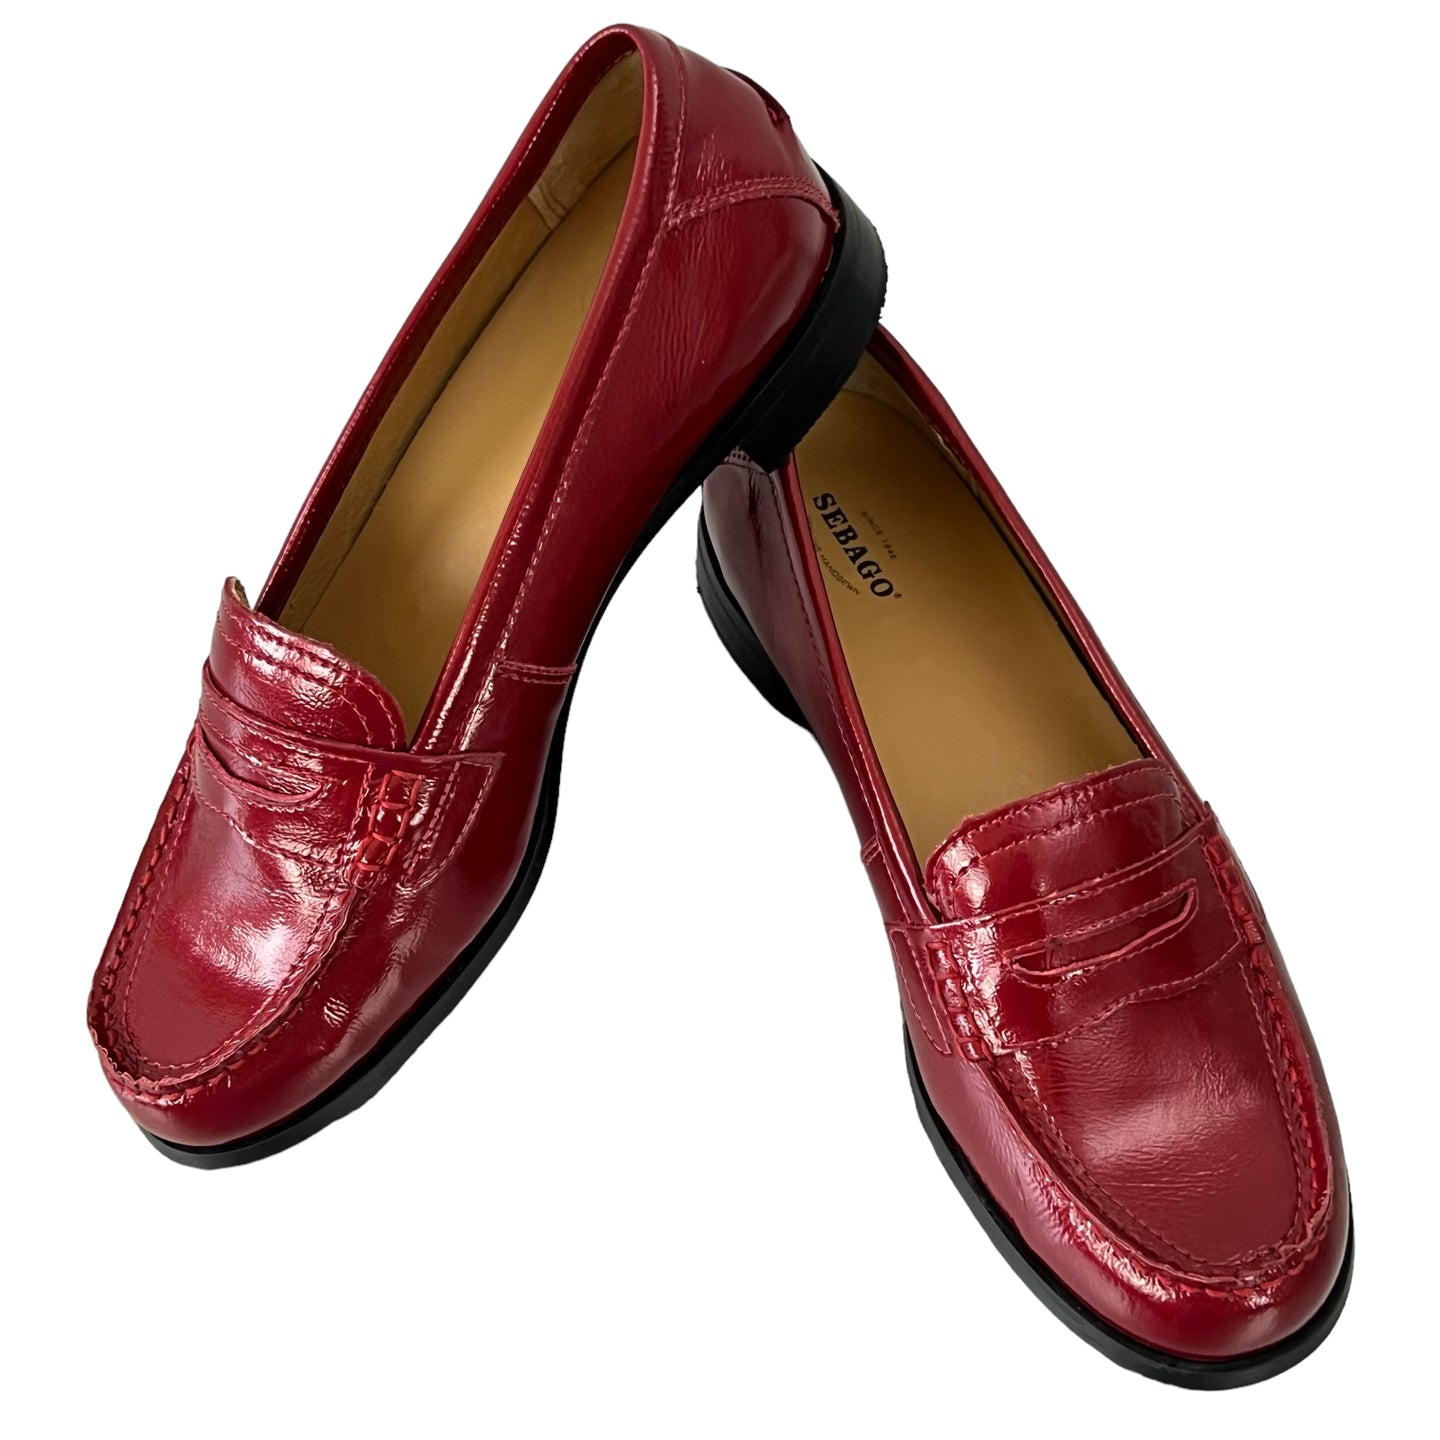 Sebago Women’s Red Patent Leather Penny Loafer Size 10